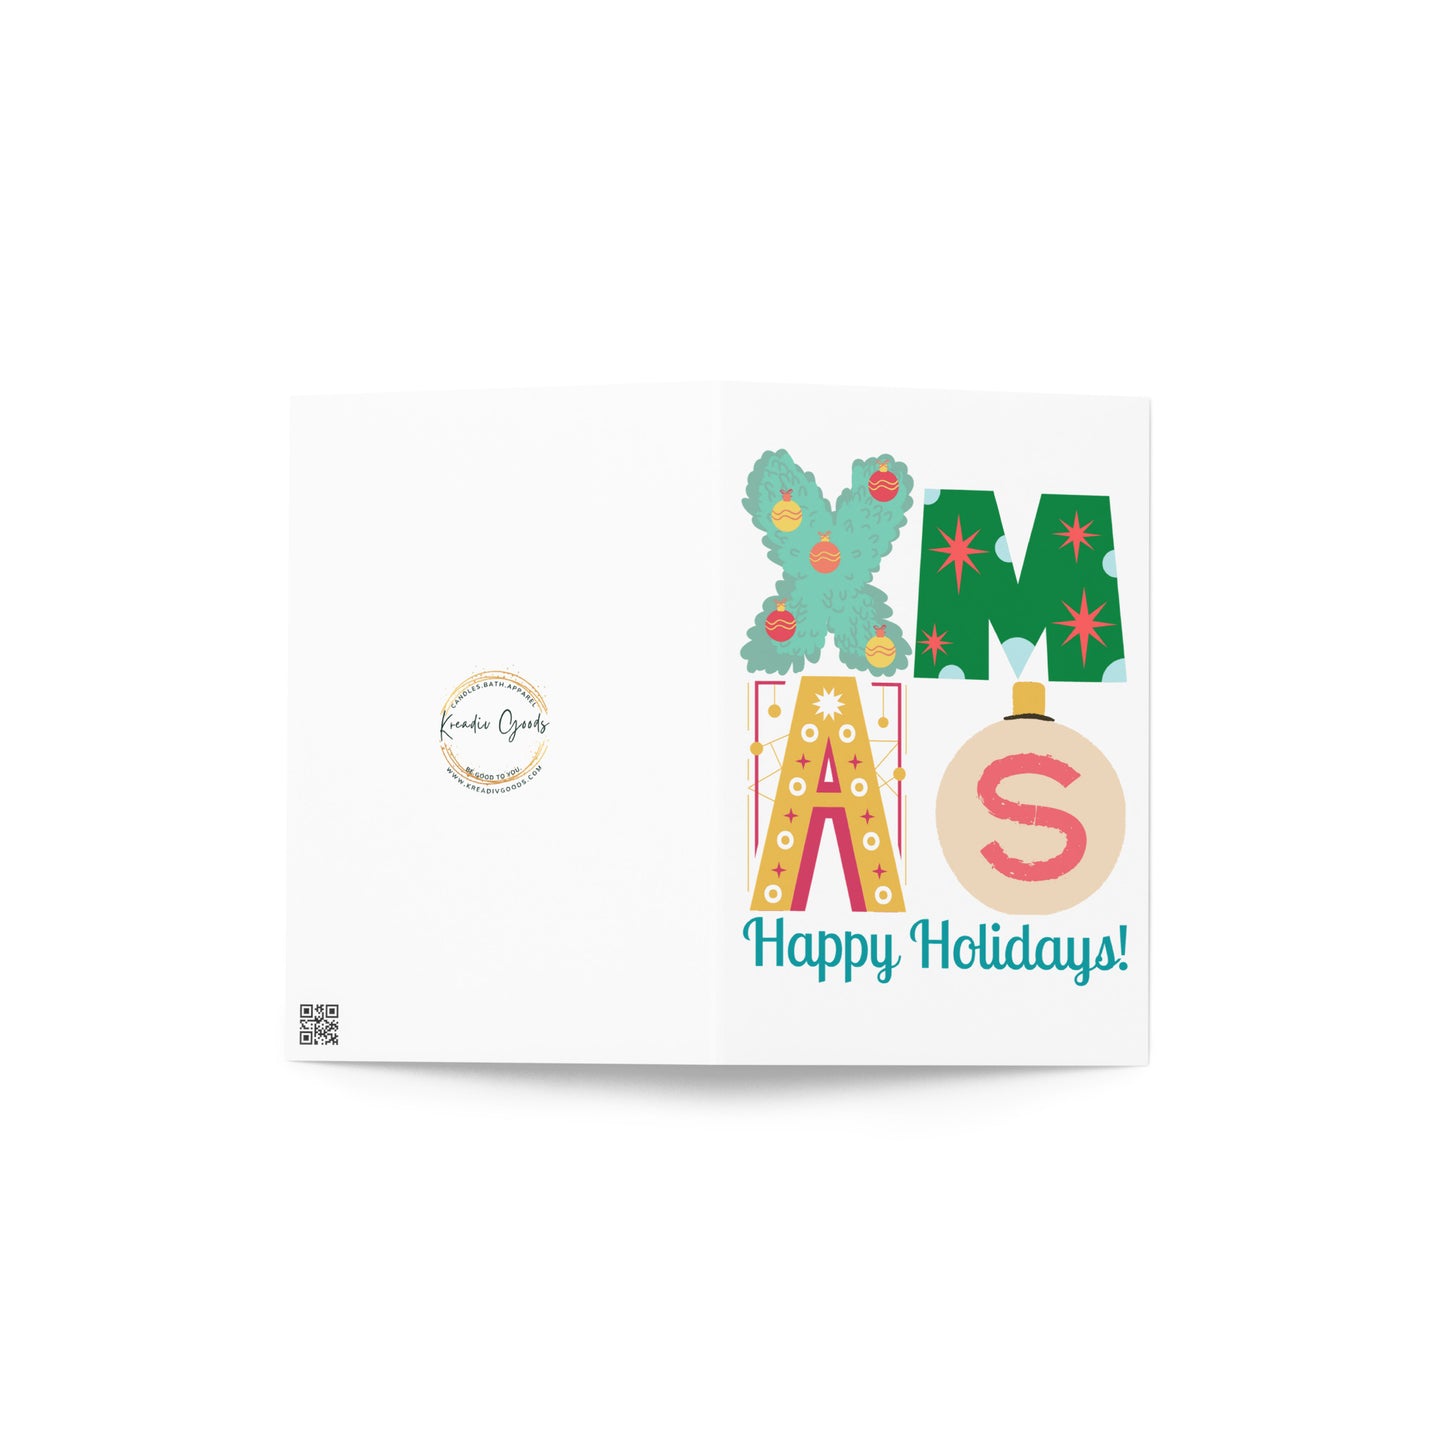 XMAS Greeting cards- Set of 10 Blank Greeting Cards and Envelopes